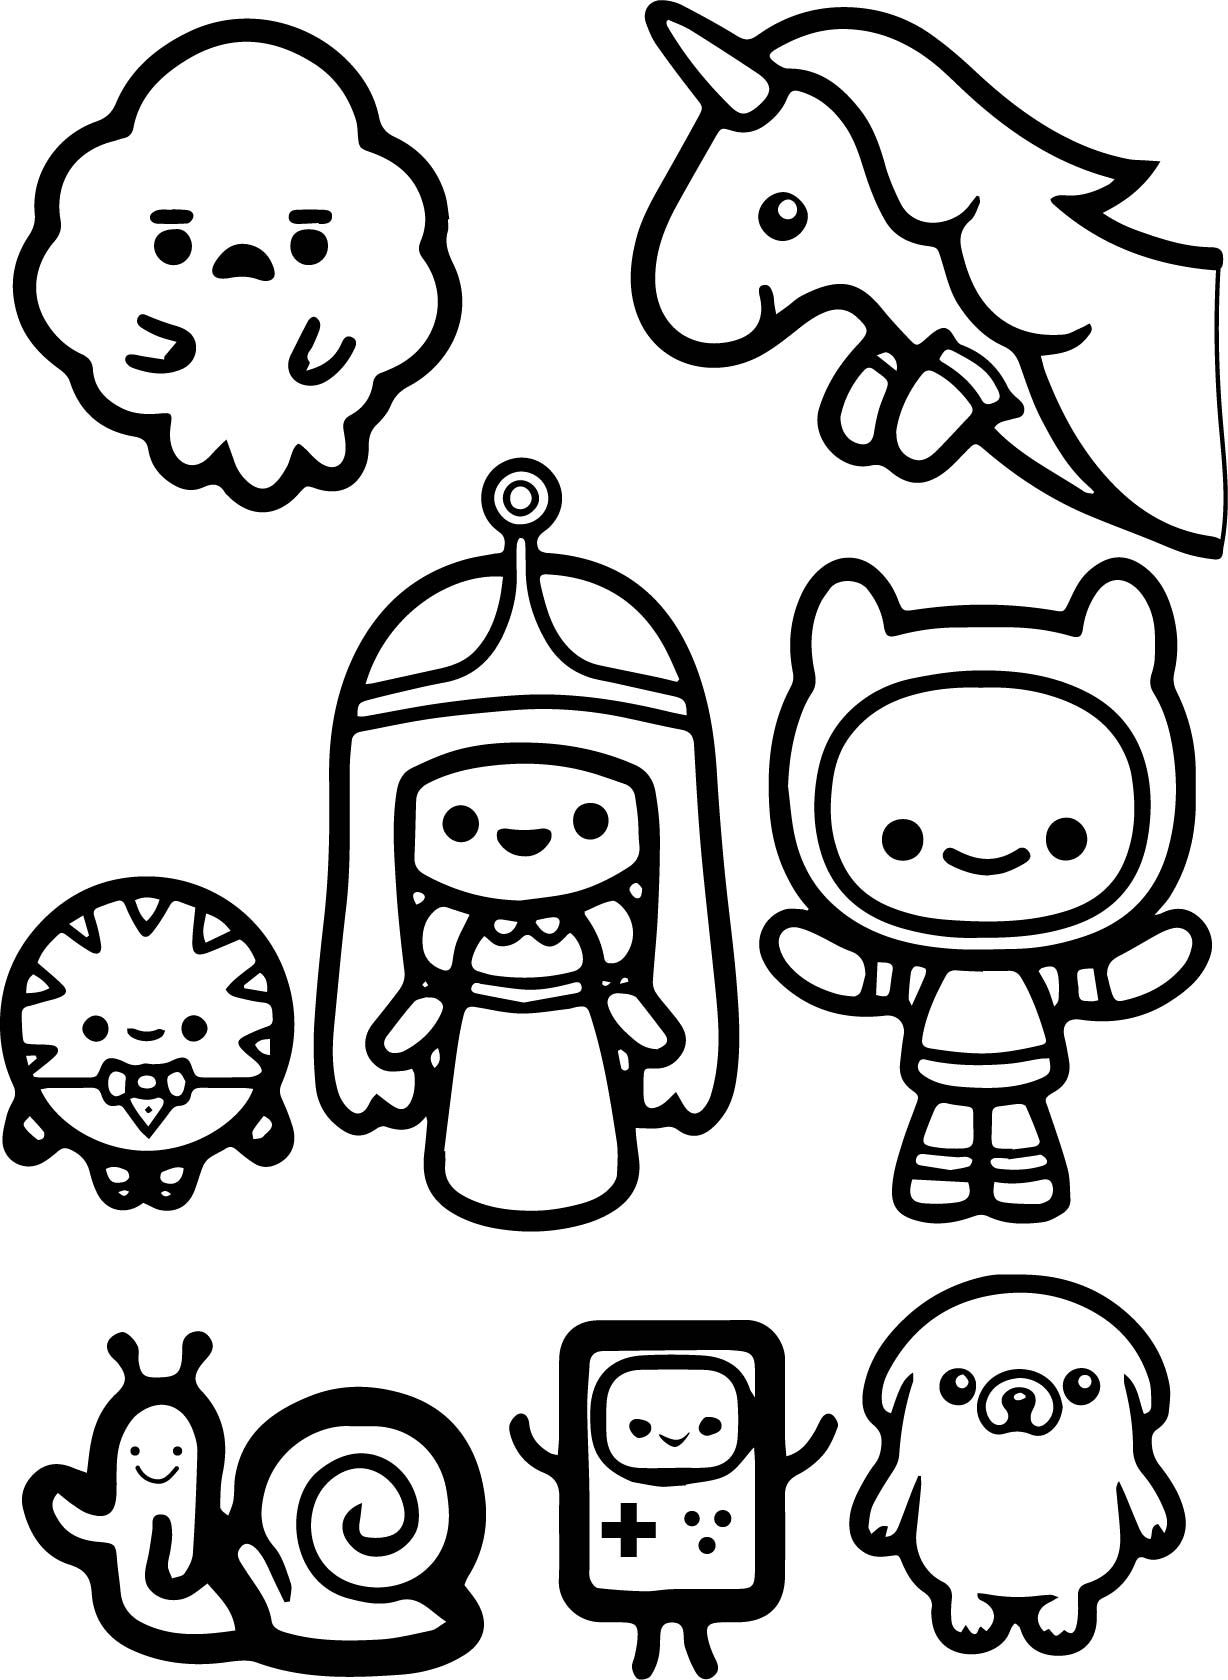 Adventure Time's Chibi Characters Coloring Page   Free Printable ...